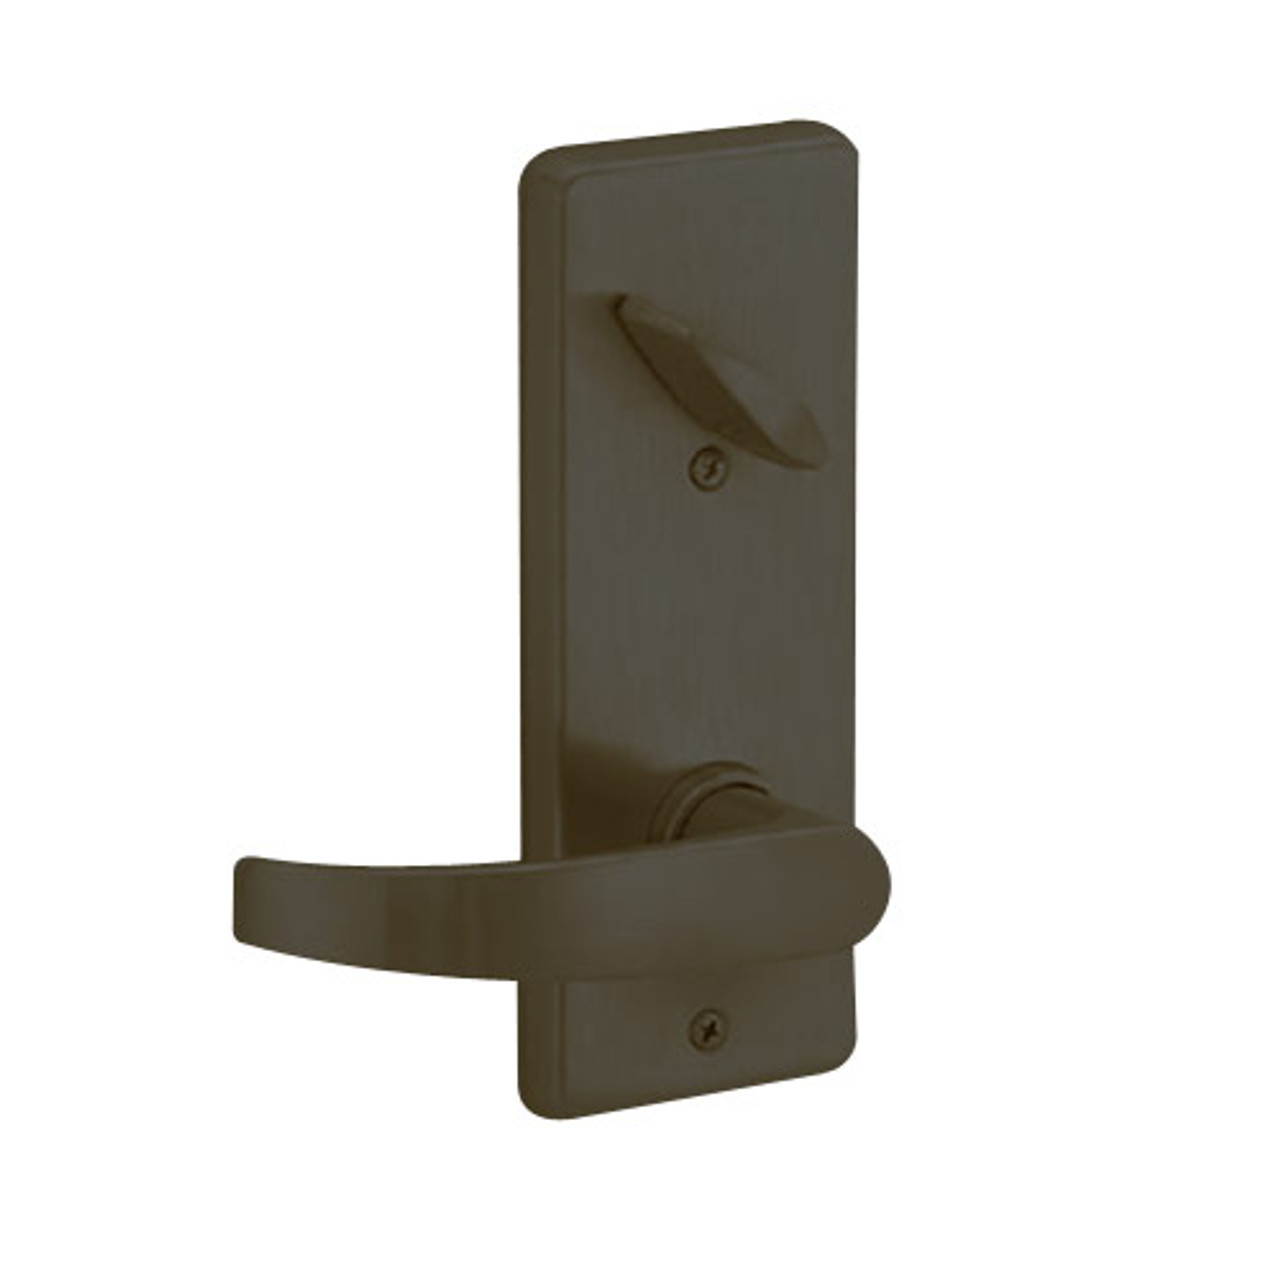 S290-NEP-613 Schlage S290 Neptune Style Interconnected Lock in Oil Rubbed Bronze